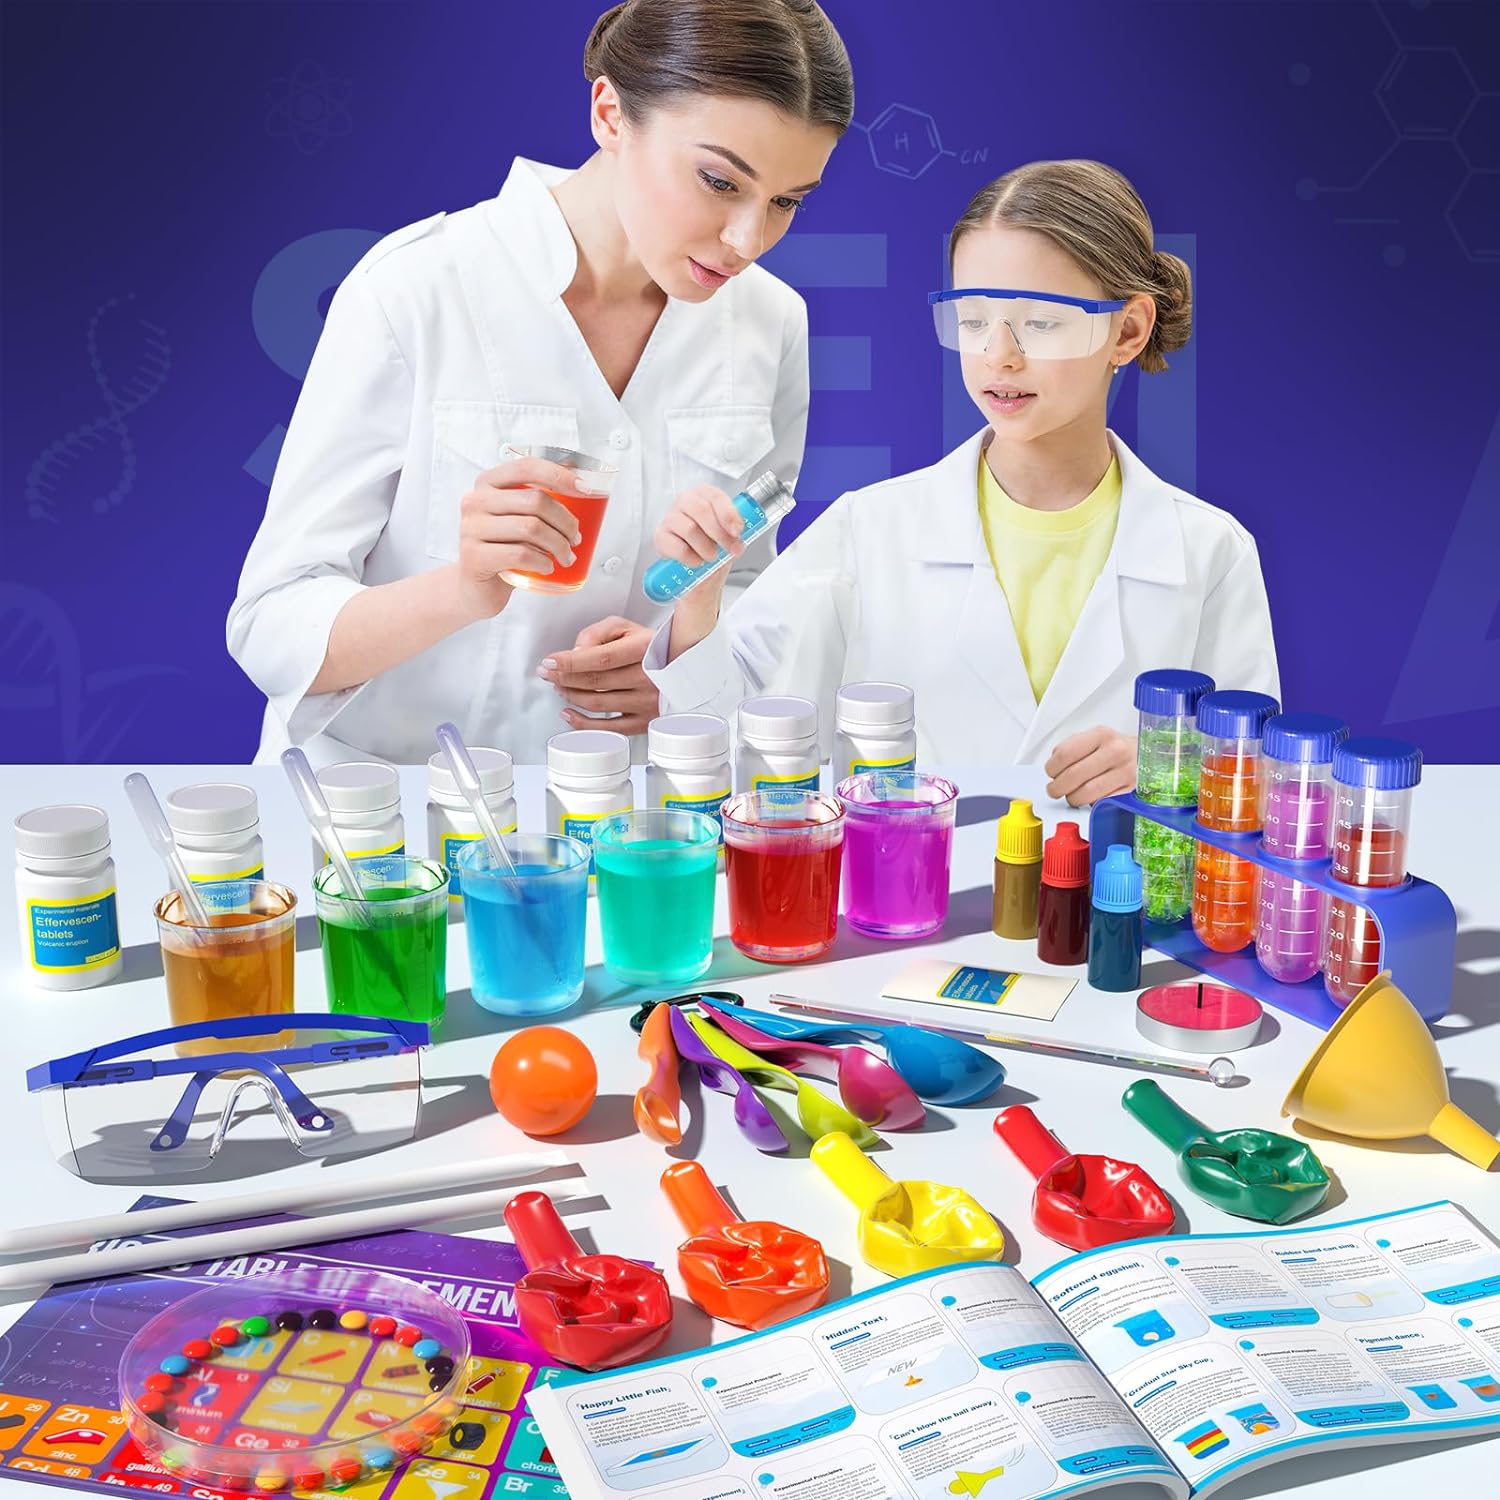 SNAEN 150+ Lab Experiments Science Kits for Kids, STEM Educational Learning Scientific Tools,Birthday Gifts and Toys for 3 4 5 6 7 8 9 10 11 12 Years Old Boys Girls Kids